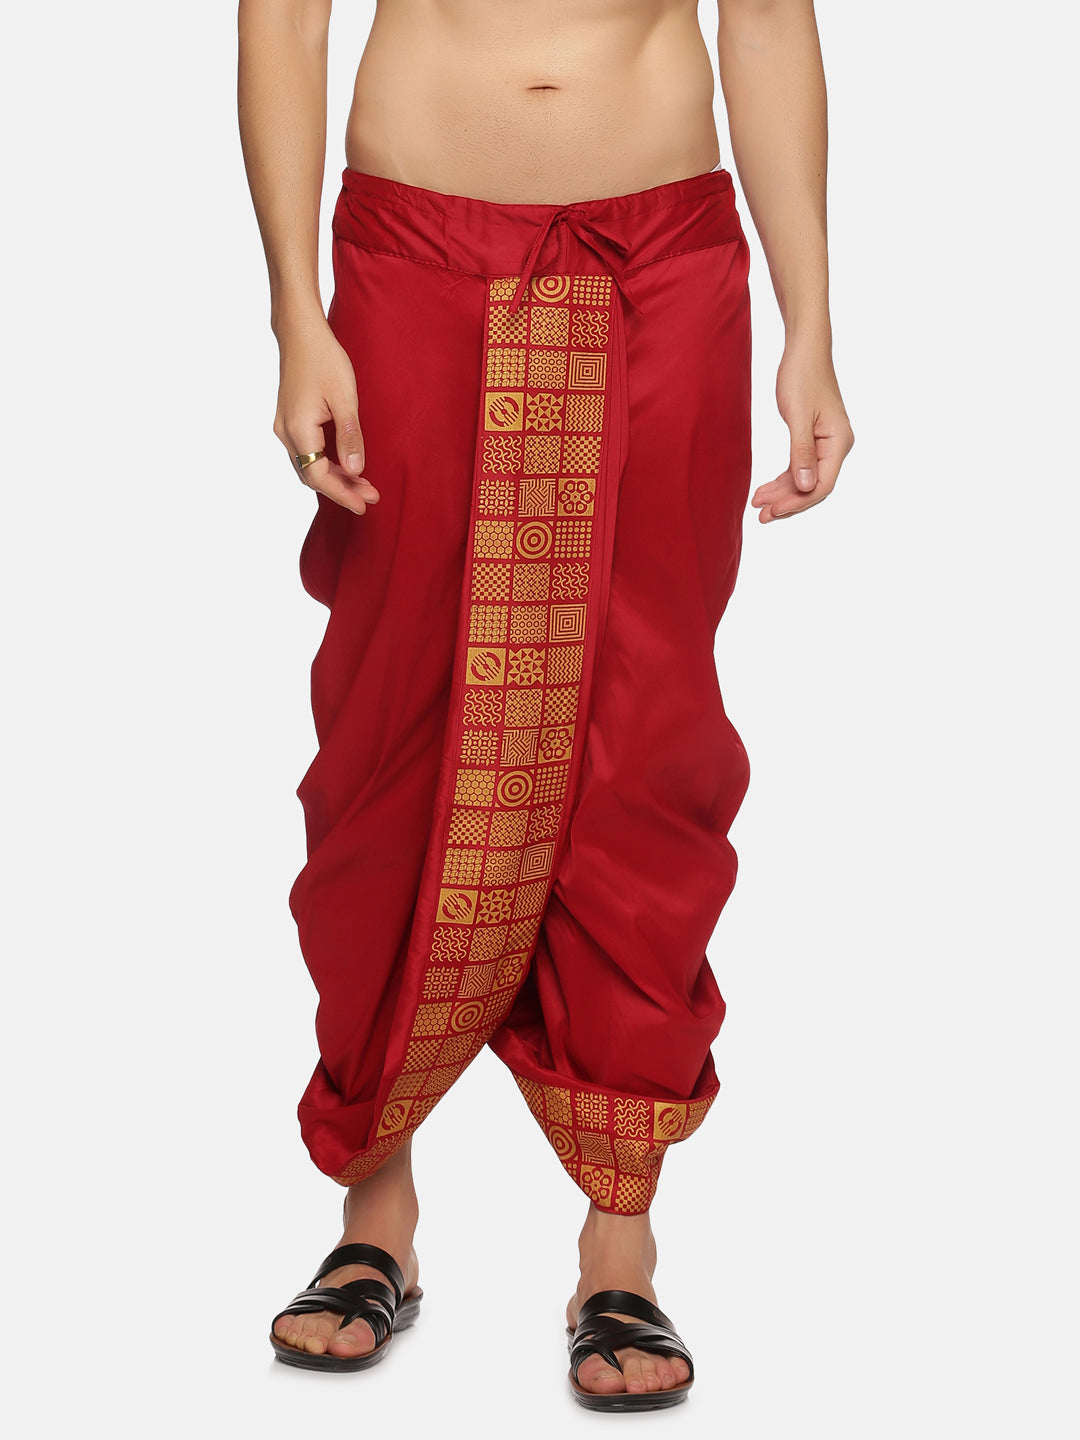 How to Style Dhoti Pants | Style & Beauty